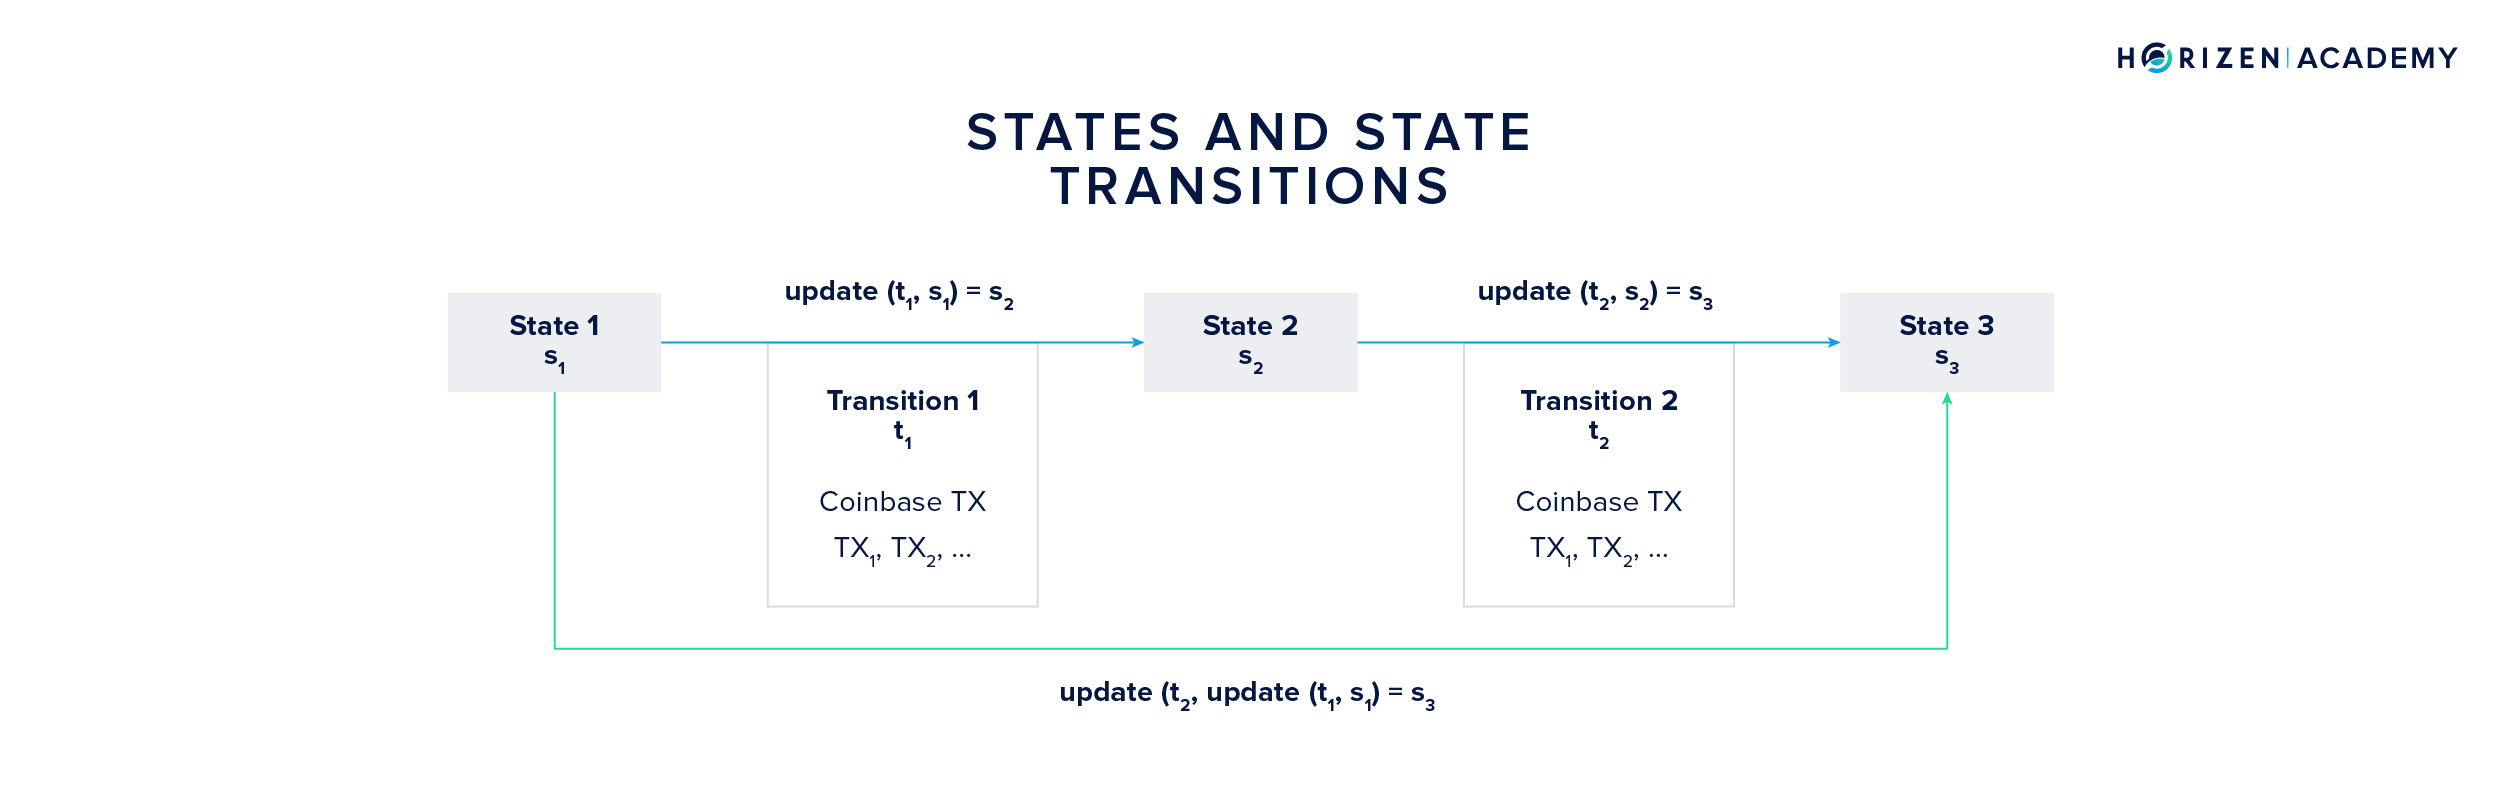 States and State Transitions